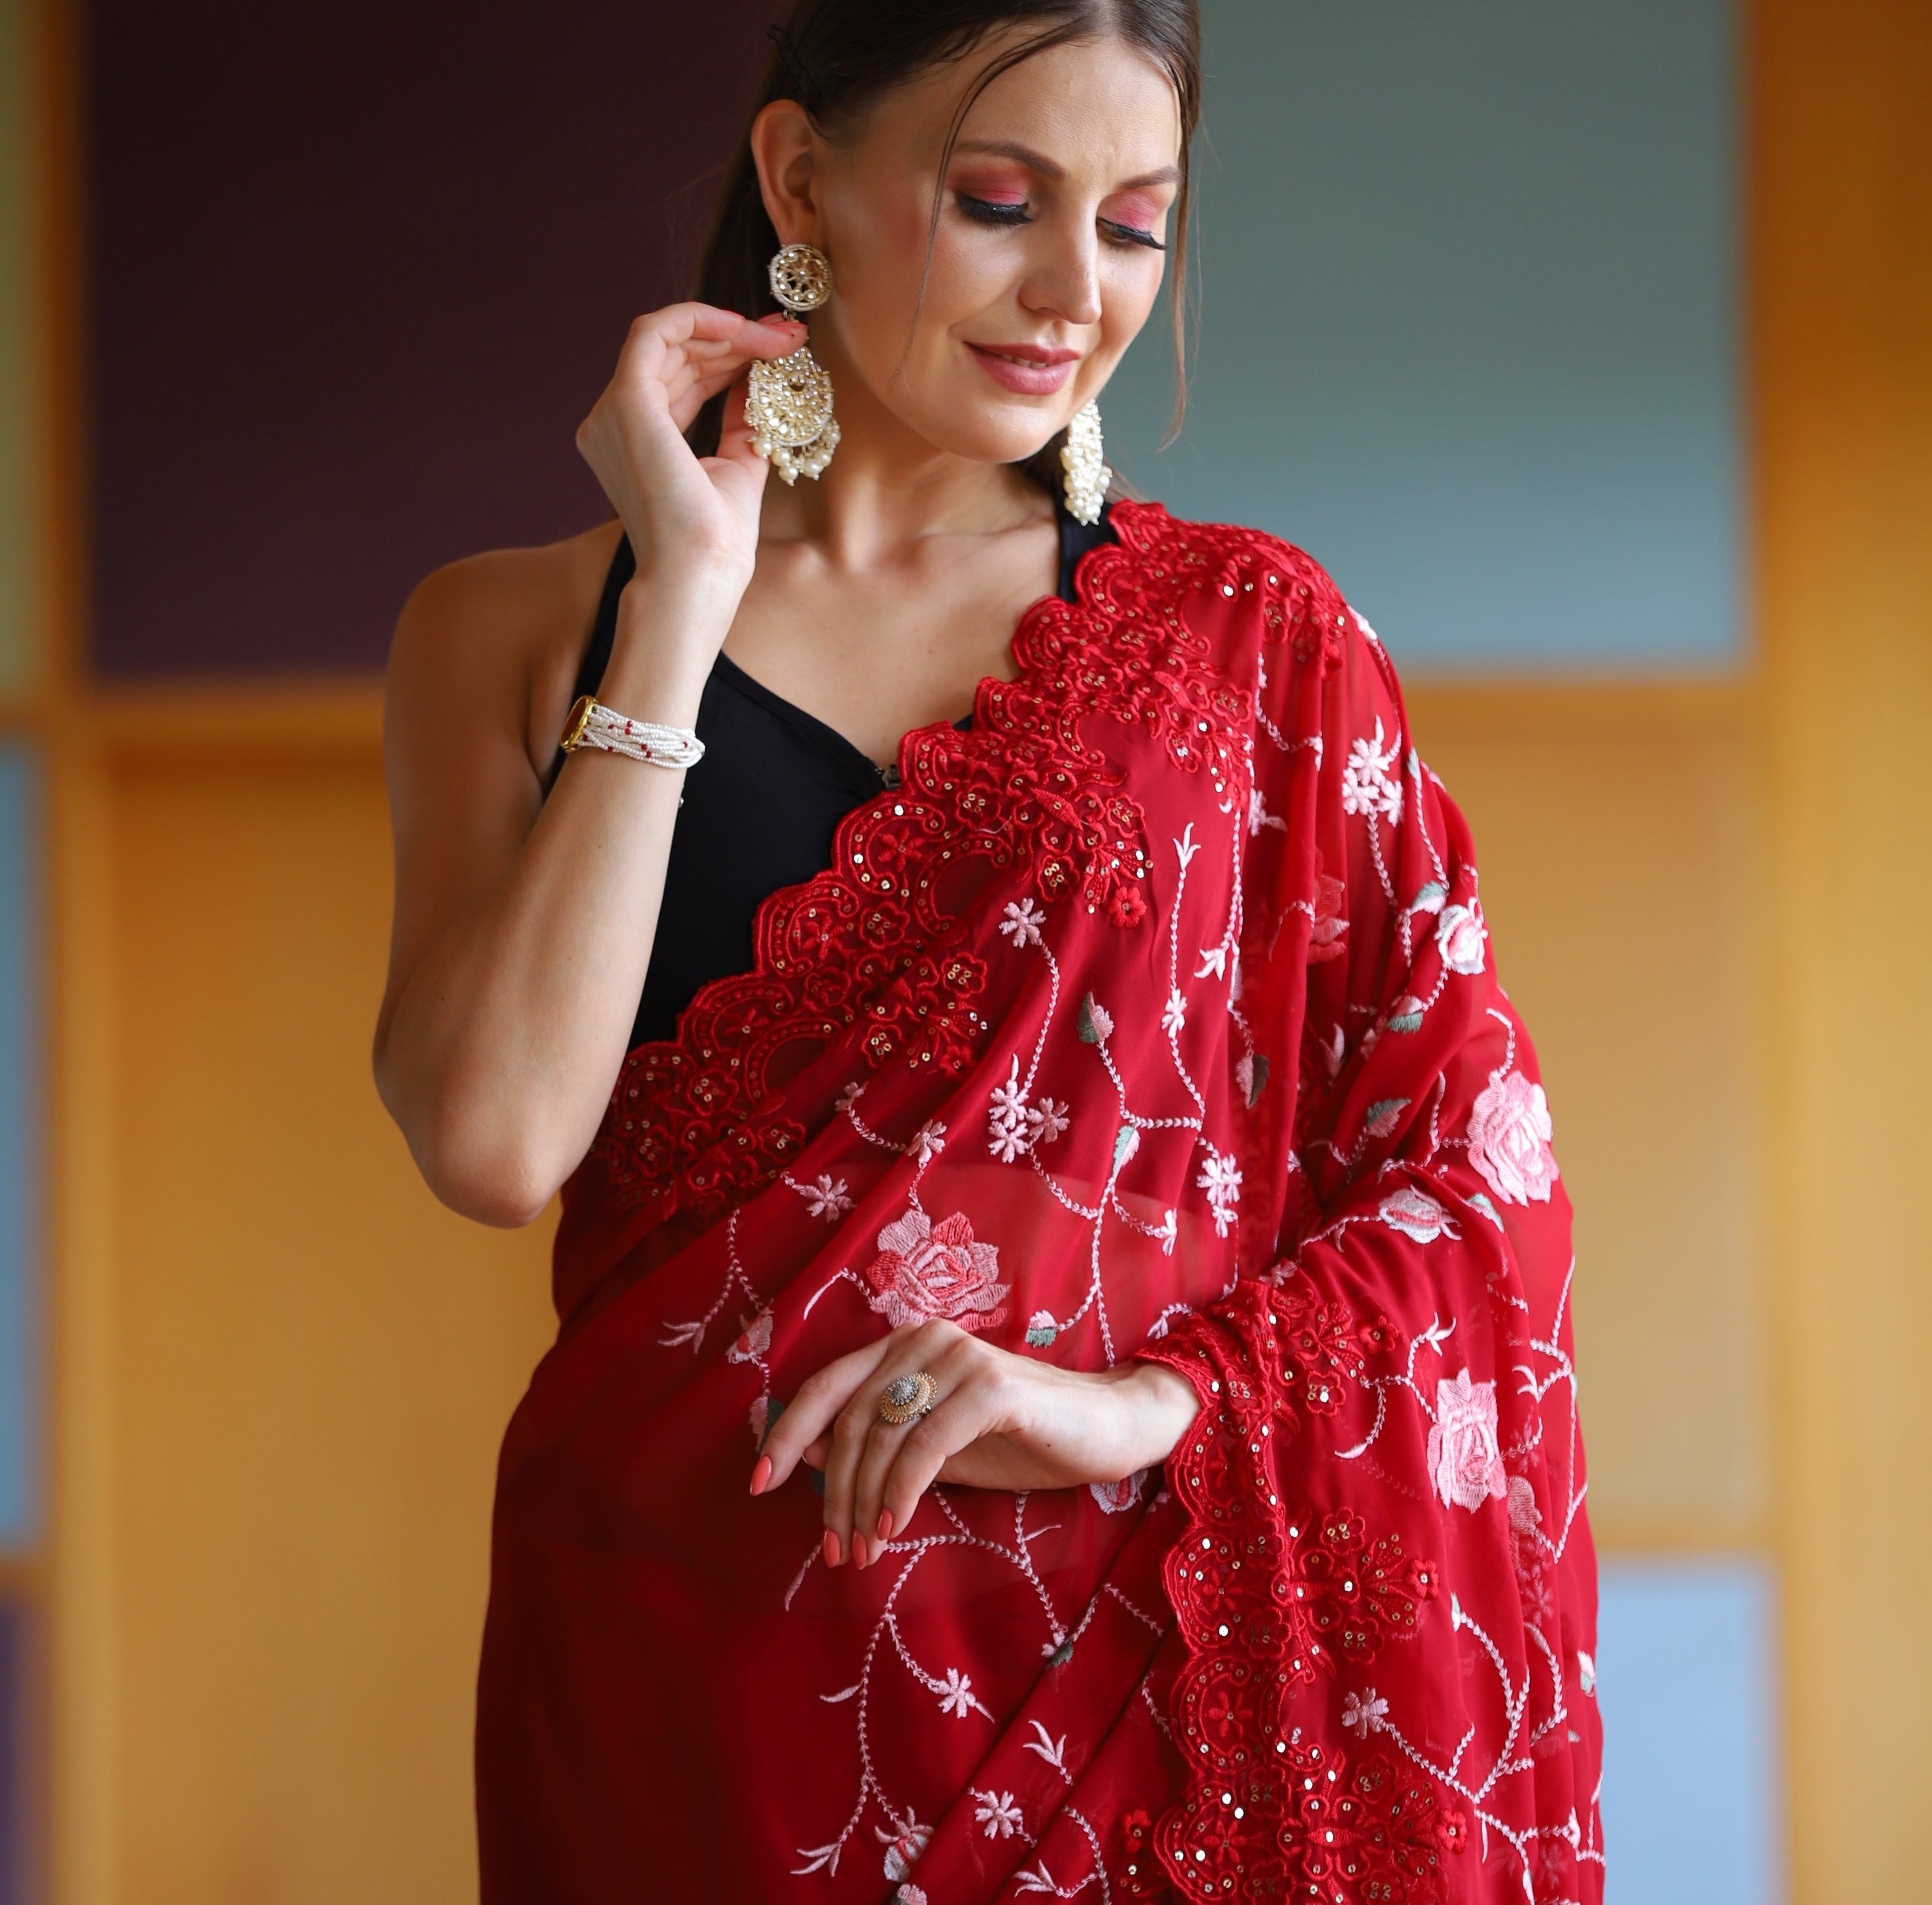 Organza silk saree is a lightweight, plain weave, sheer fabric that is made from silk. It is a popular saree material putting together a classy, comfortable, and elegant look.